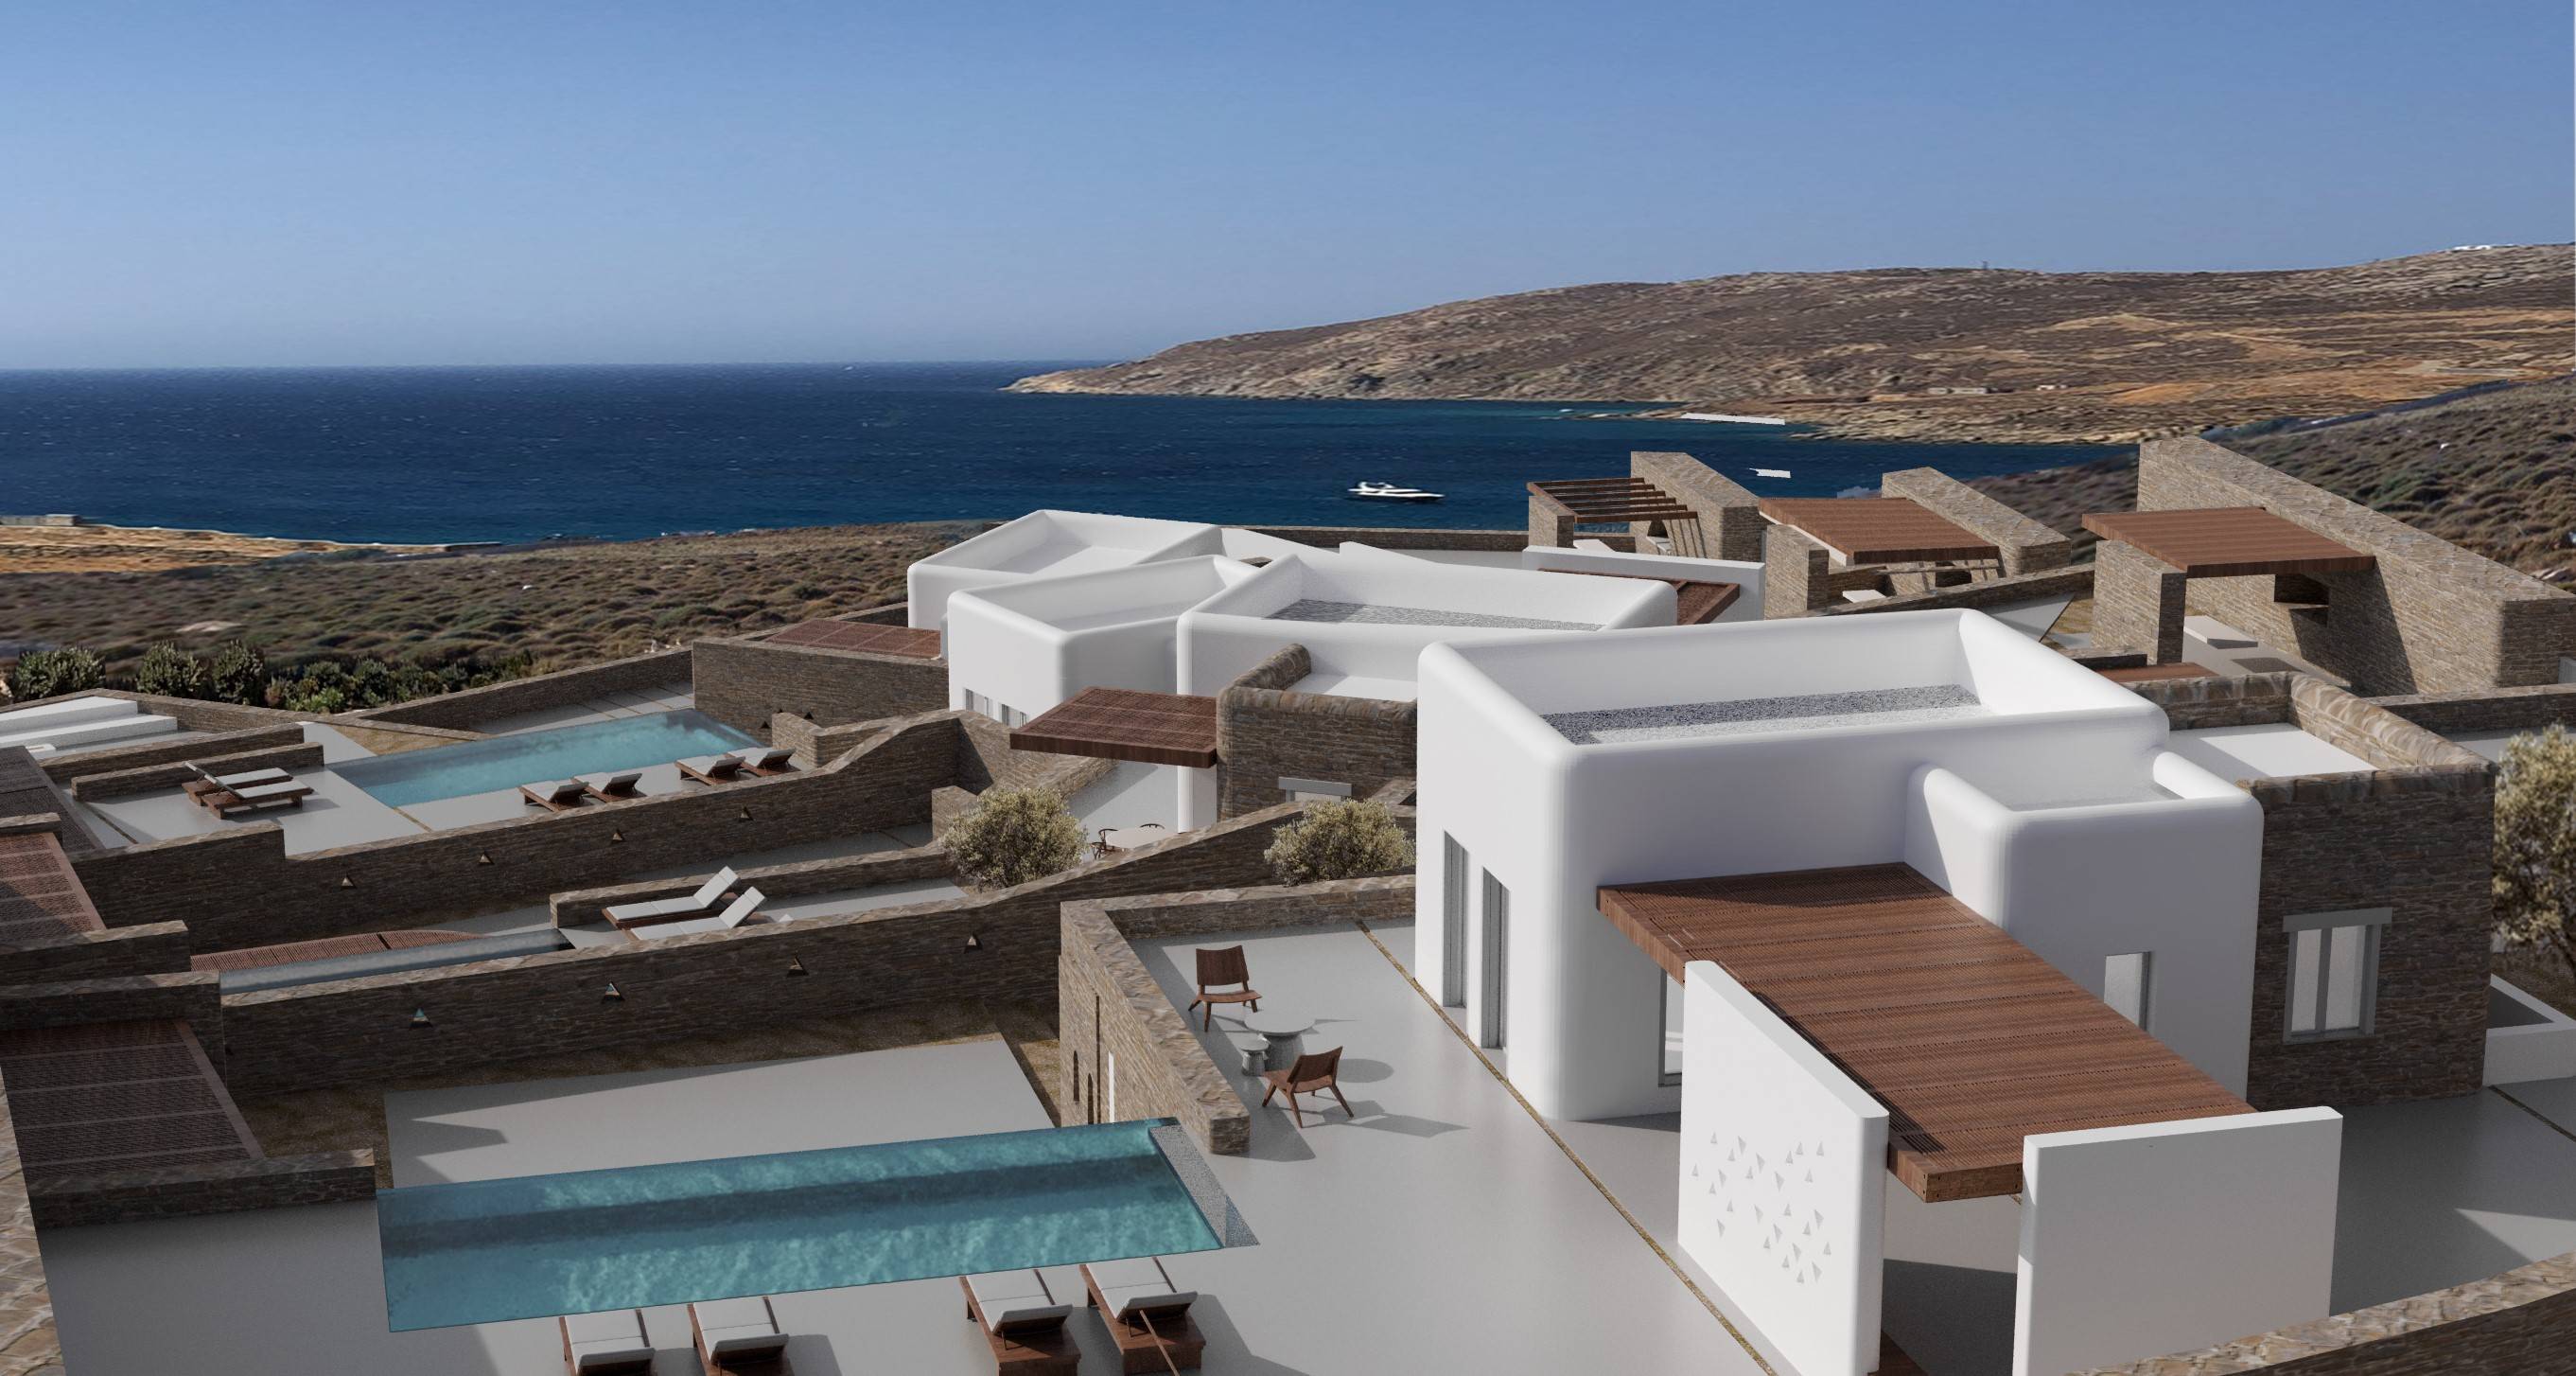 Outstanding 13 Villa complex with panoramic seaviews of the Aegean sea, each one with private swimming pool in Mykonos